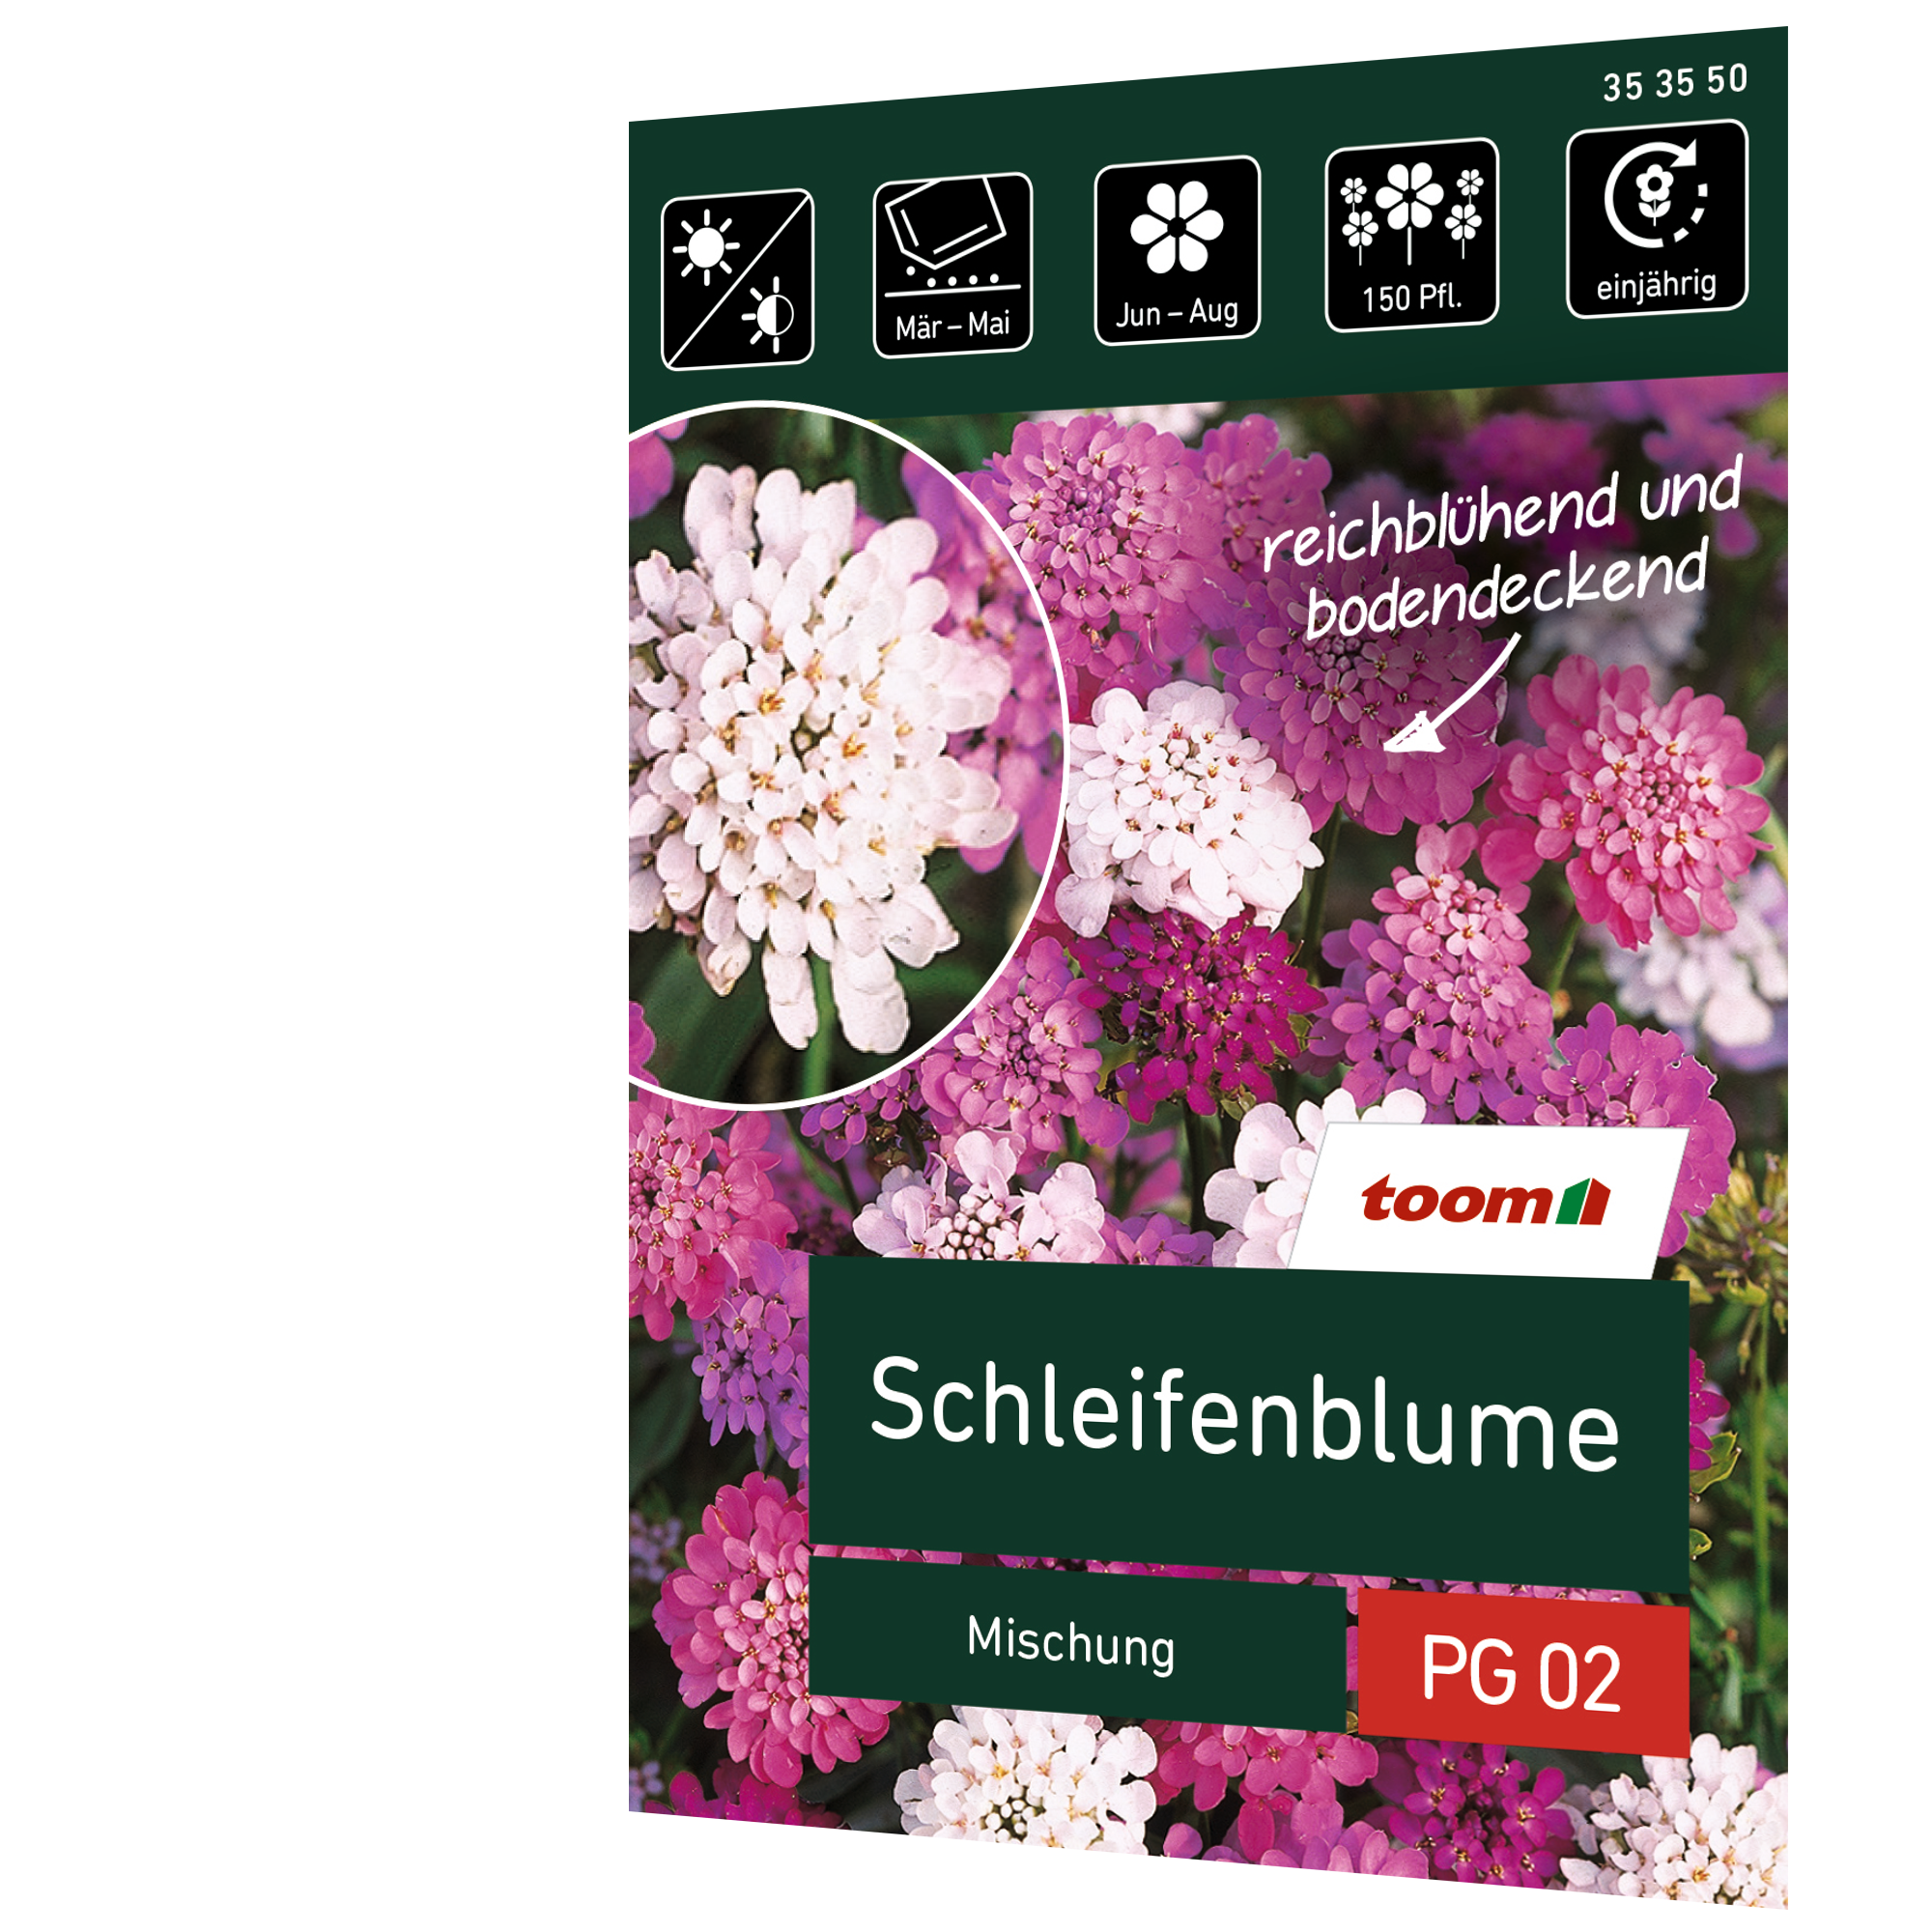 Schleifenblume 'Mischung' + product picture